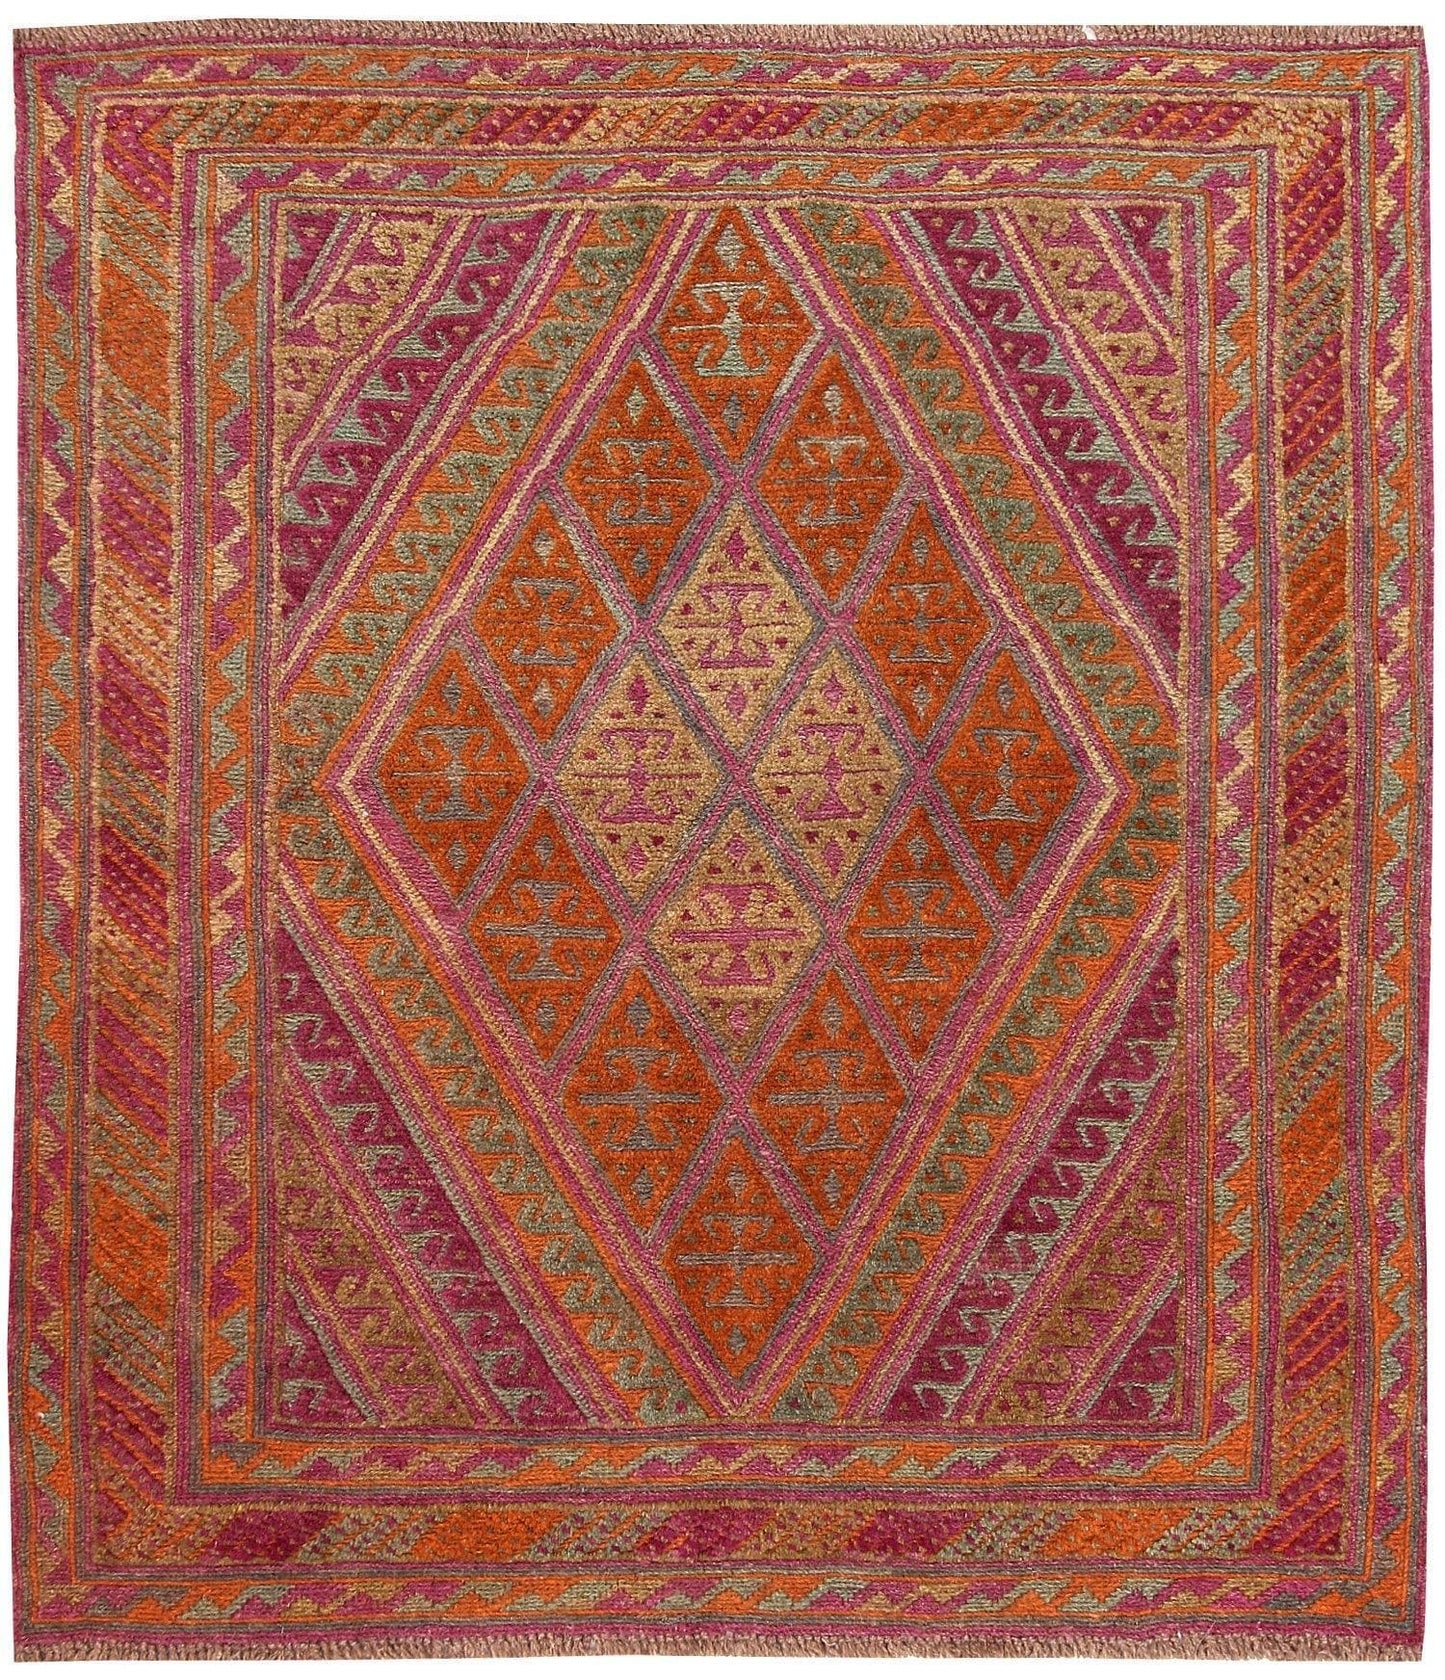 Gilded Citrus Diamonds Hand Knotted Area Rug - MAIA HOMES